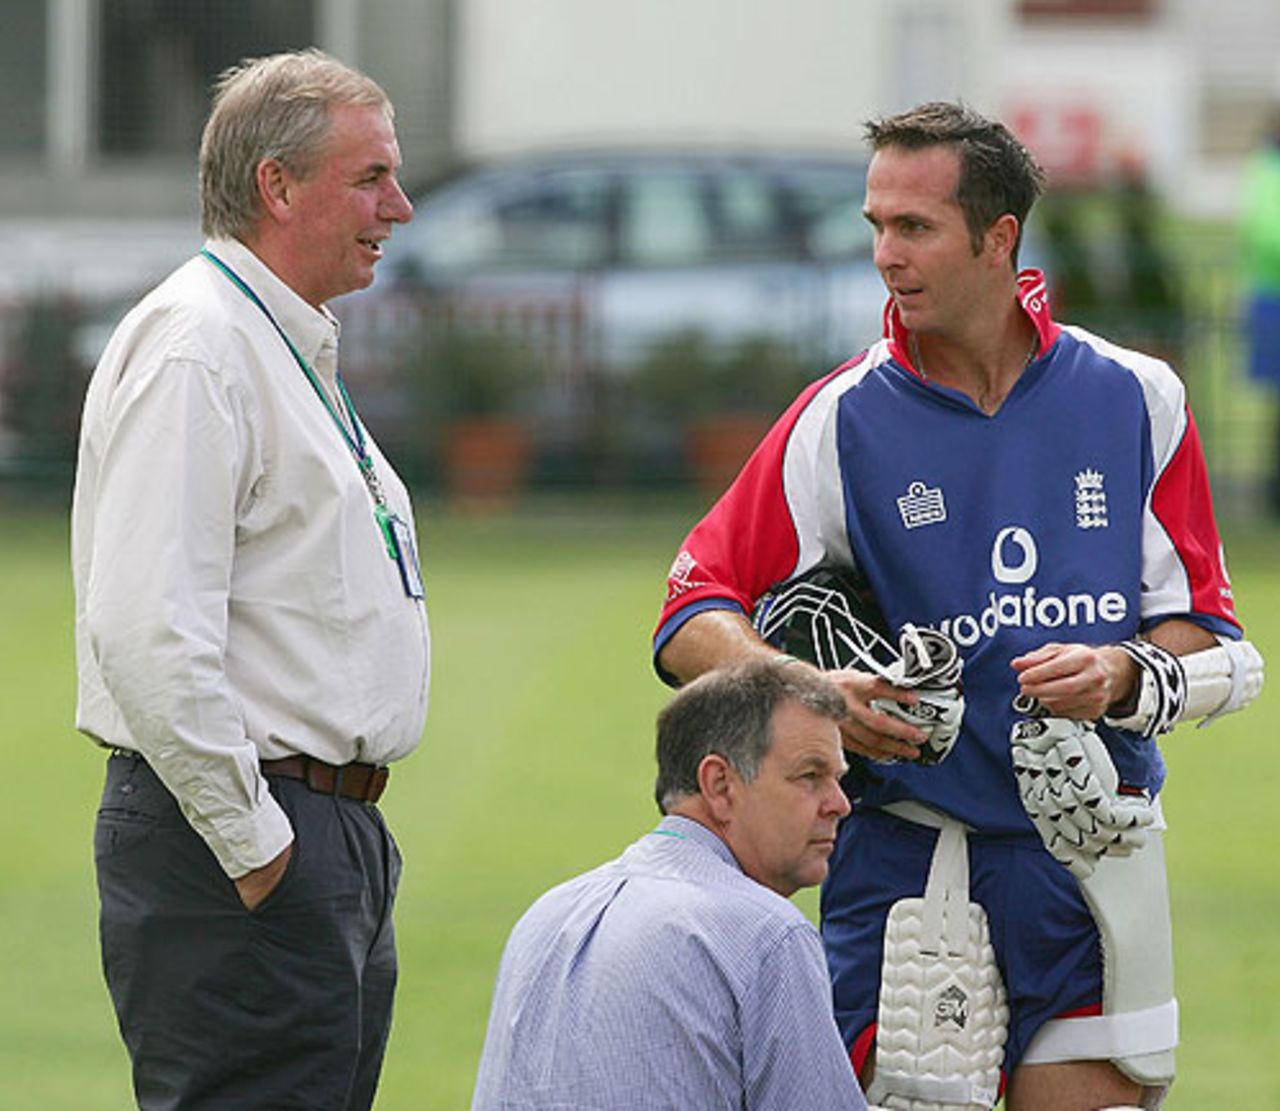 David Graveney, Michael Vaughan and Geoff Miller (seated) during the 2005 Ashes